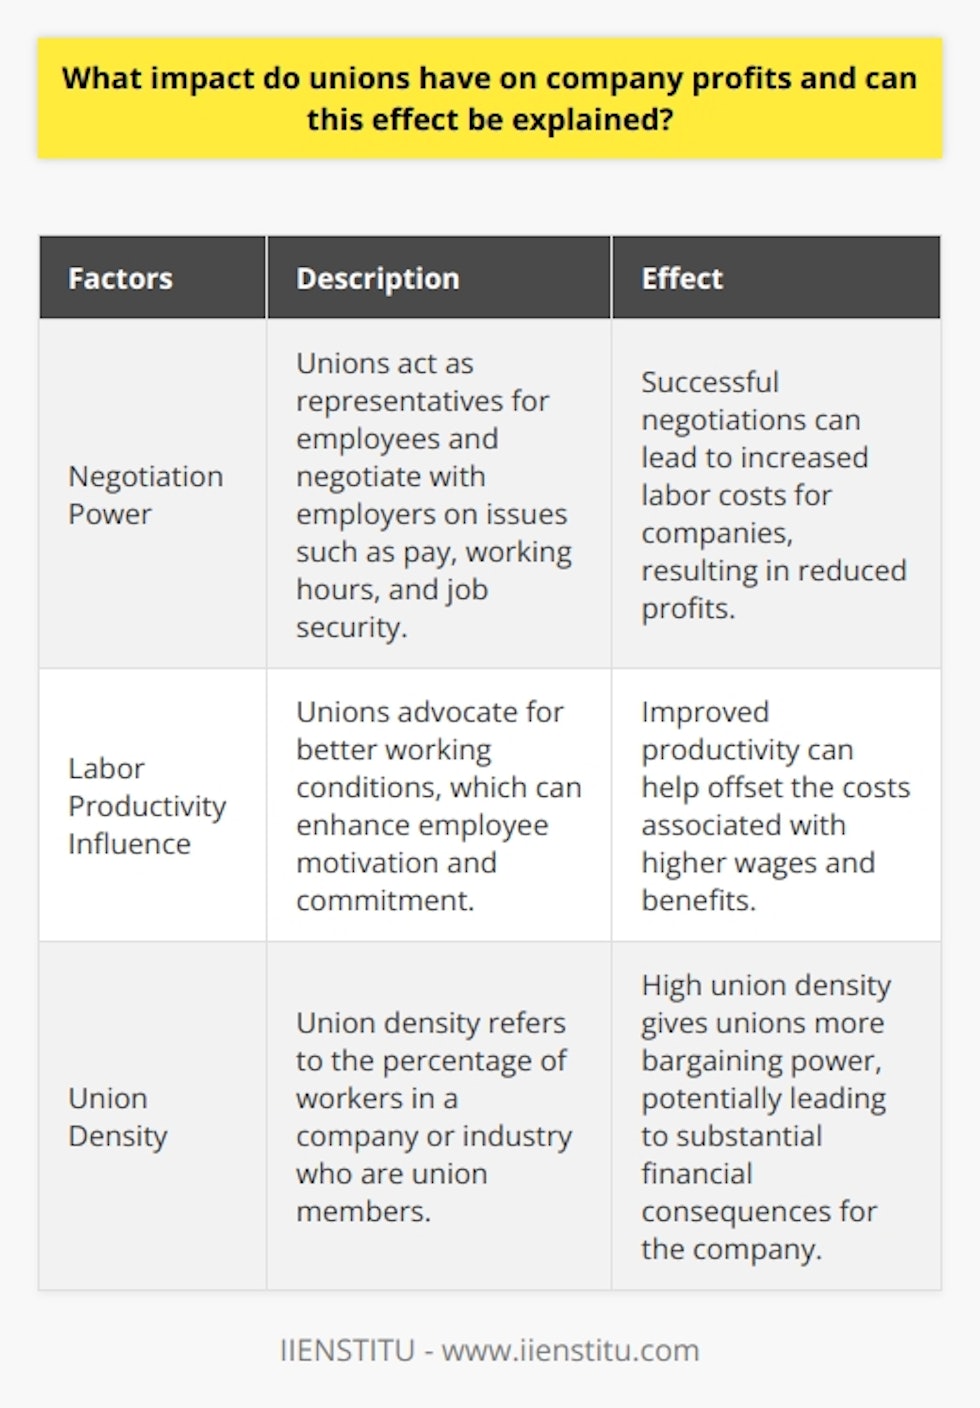 Unions play a significant role in influencing company profits by advocating for better wages, working conditions, and benefits for employees. This impact can be explained through factors such as negotiation power, labor productivity influence, and union density.One of the main ways that unions influence company profits is through their negotiation power. Unions act as representatives for employees and negotiate with employers on various issues, including pay, working hours, and job security. When unions successfully negotiate better compensation packages for their members, it often leads to increased labor costs for companies, resulting in reduced profits.Unions can also have a positive influence on labor productivity. By advocating for better working conditions, such as adequate breaks, safe environments, and reasonable workloads, unions can enhance employee motivation and commitment. When employees are satisfied and feel valued, they tend to work more efficiently and effectively, ultimately boosting the company's overall productivity. This improved productivity can help offset the costs associated with higher wages and benefits.Additionally, the impact of unions on company profits is influenced by union density. Union density refers to the percentage of workers in a company or industry who are union members. High union density gives unions more bargaining power in negotiations, allowing them to have a greater impact on labor costs and company profits. When unions represent a significant portion of the workforce, they have more leverage to advocate for favorable terms, which can potentially lead to substantial financial consequences for the company.In summary, unions play a crucial role in shaping company profits by advocating for better wages, working conditions, and benefits for employees. Their impact can be explained through factors such as negotiation power, influence on labor productivity, and union density. Understanding these influences can provide insights into how unions affect company profitability.